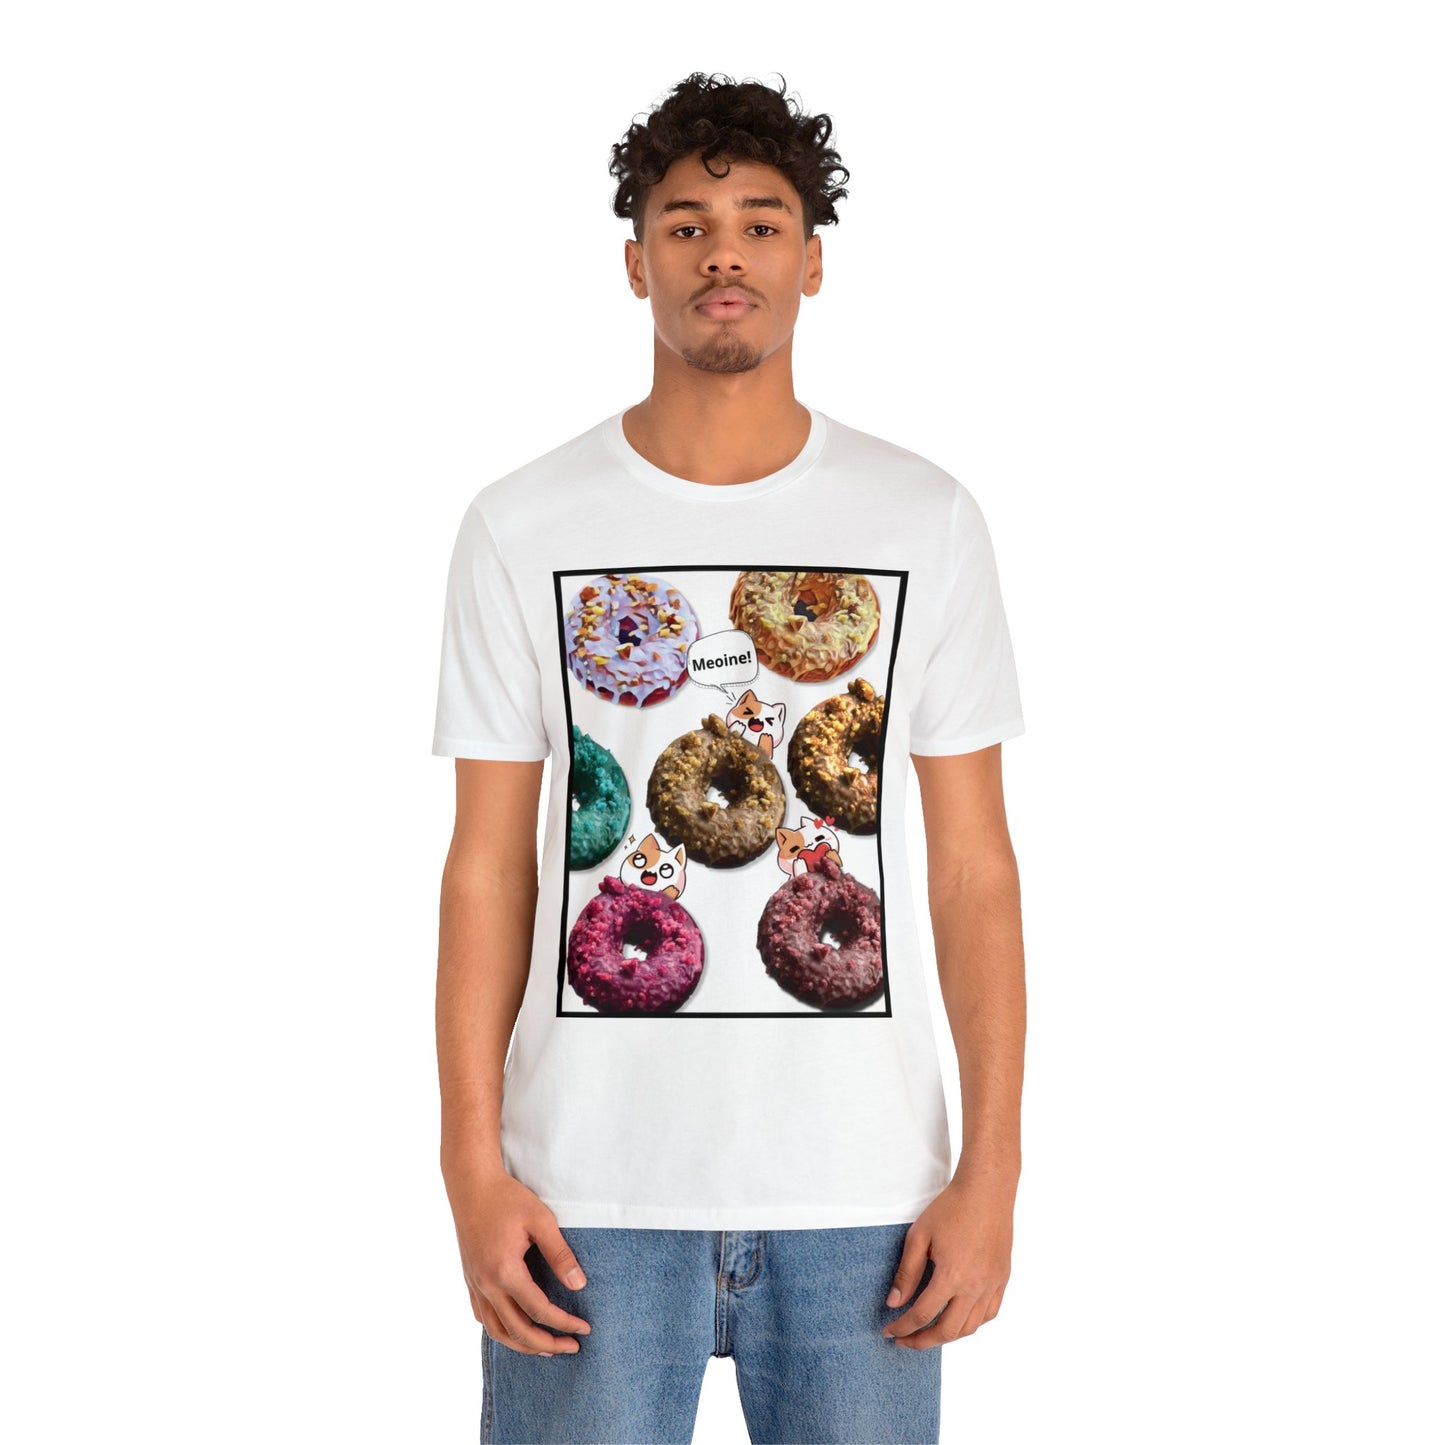 Kitten and Donuts T-Shirt